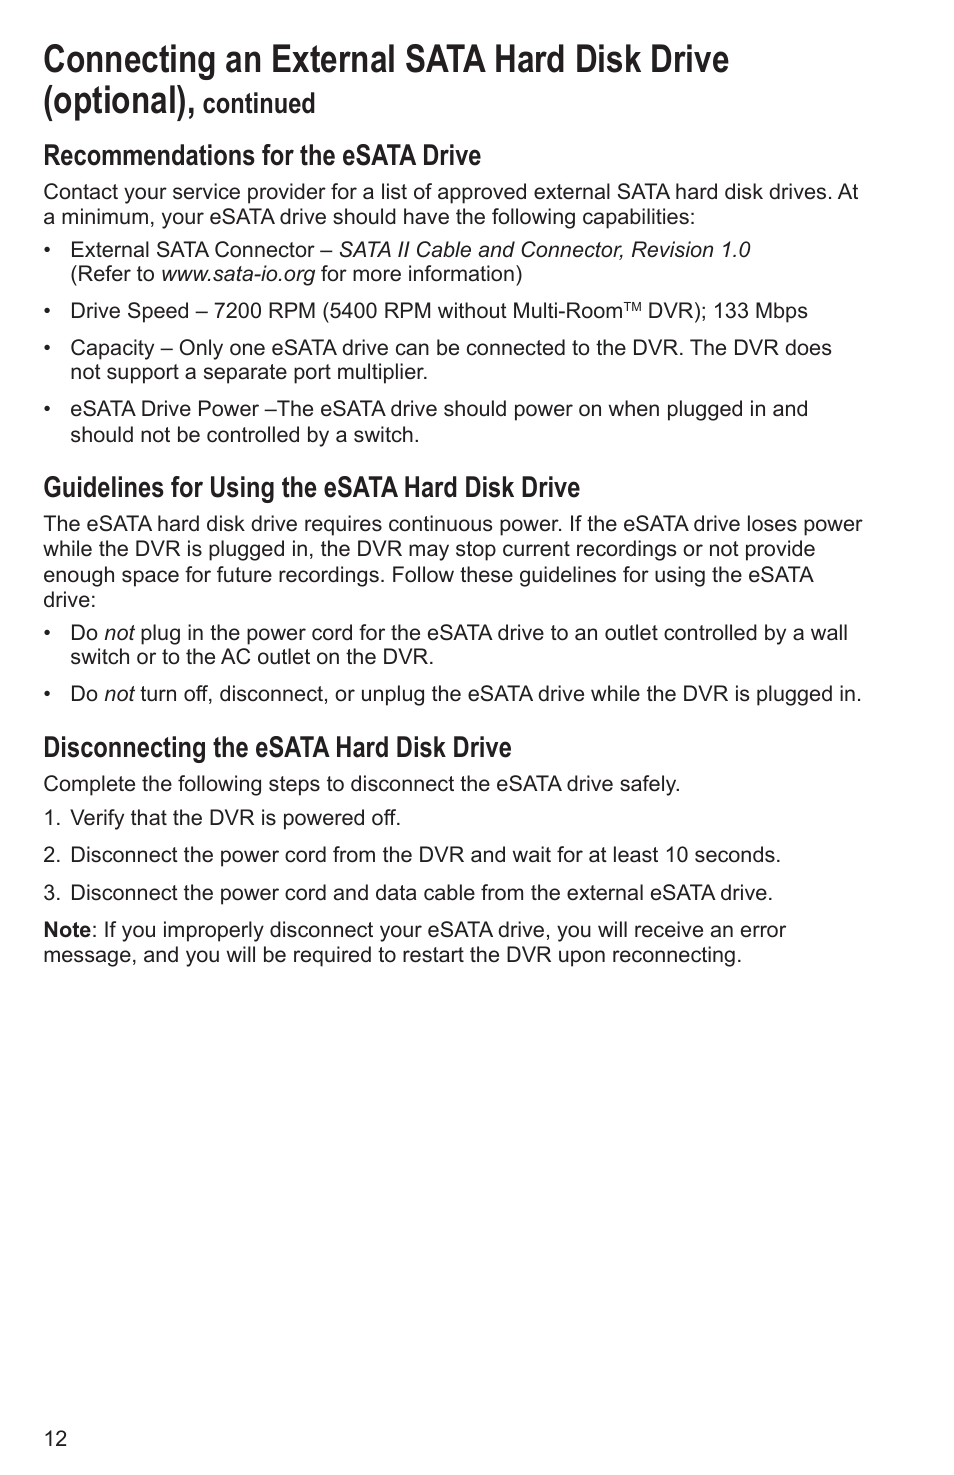 Continued recommendations for the esata drive, Guidelines for using the esata hard disk drive, Disconnecting the esata hard disk drive | Cisco Explorer 8300 User Manual | Page 18 / 20